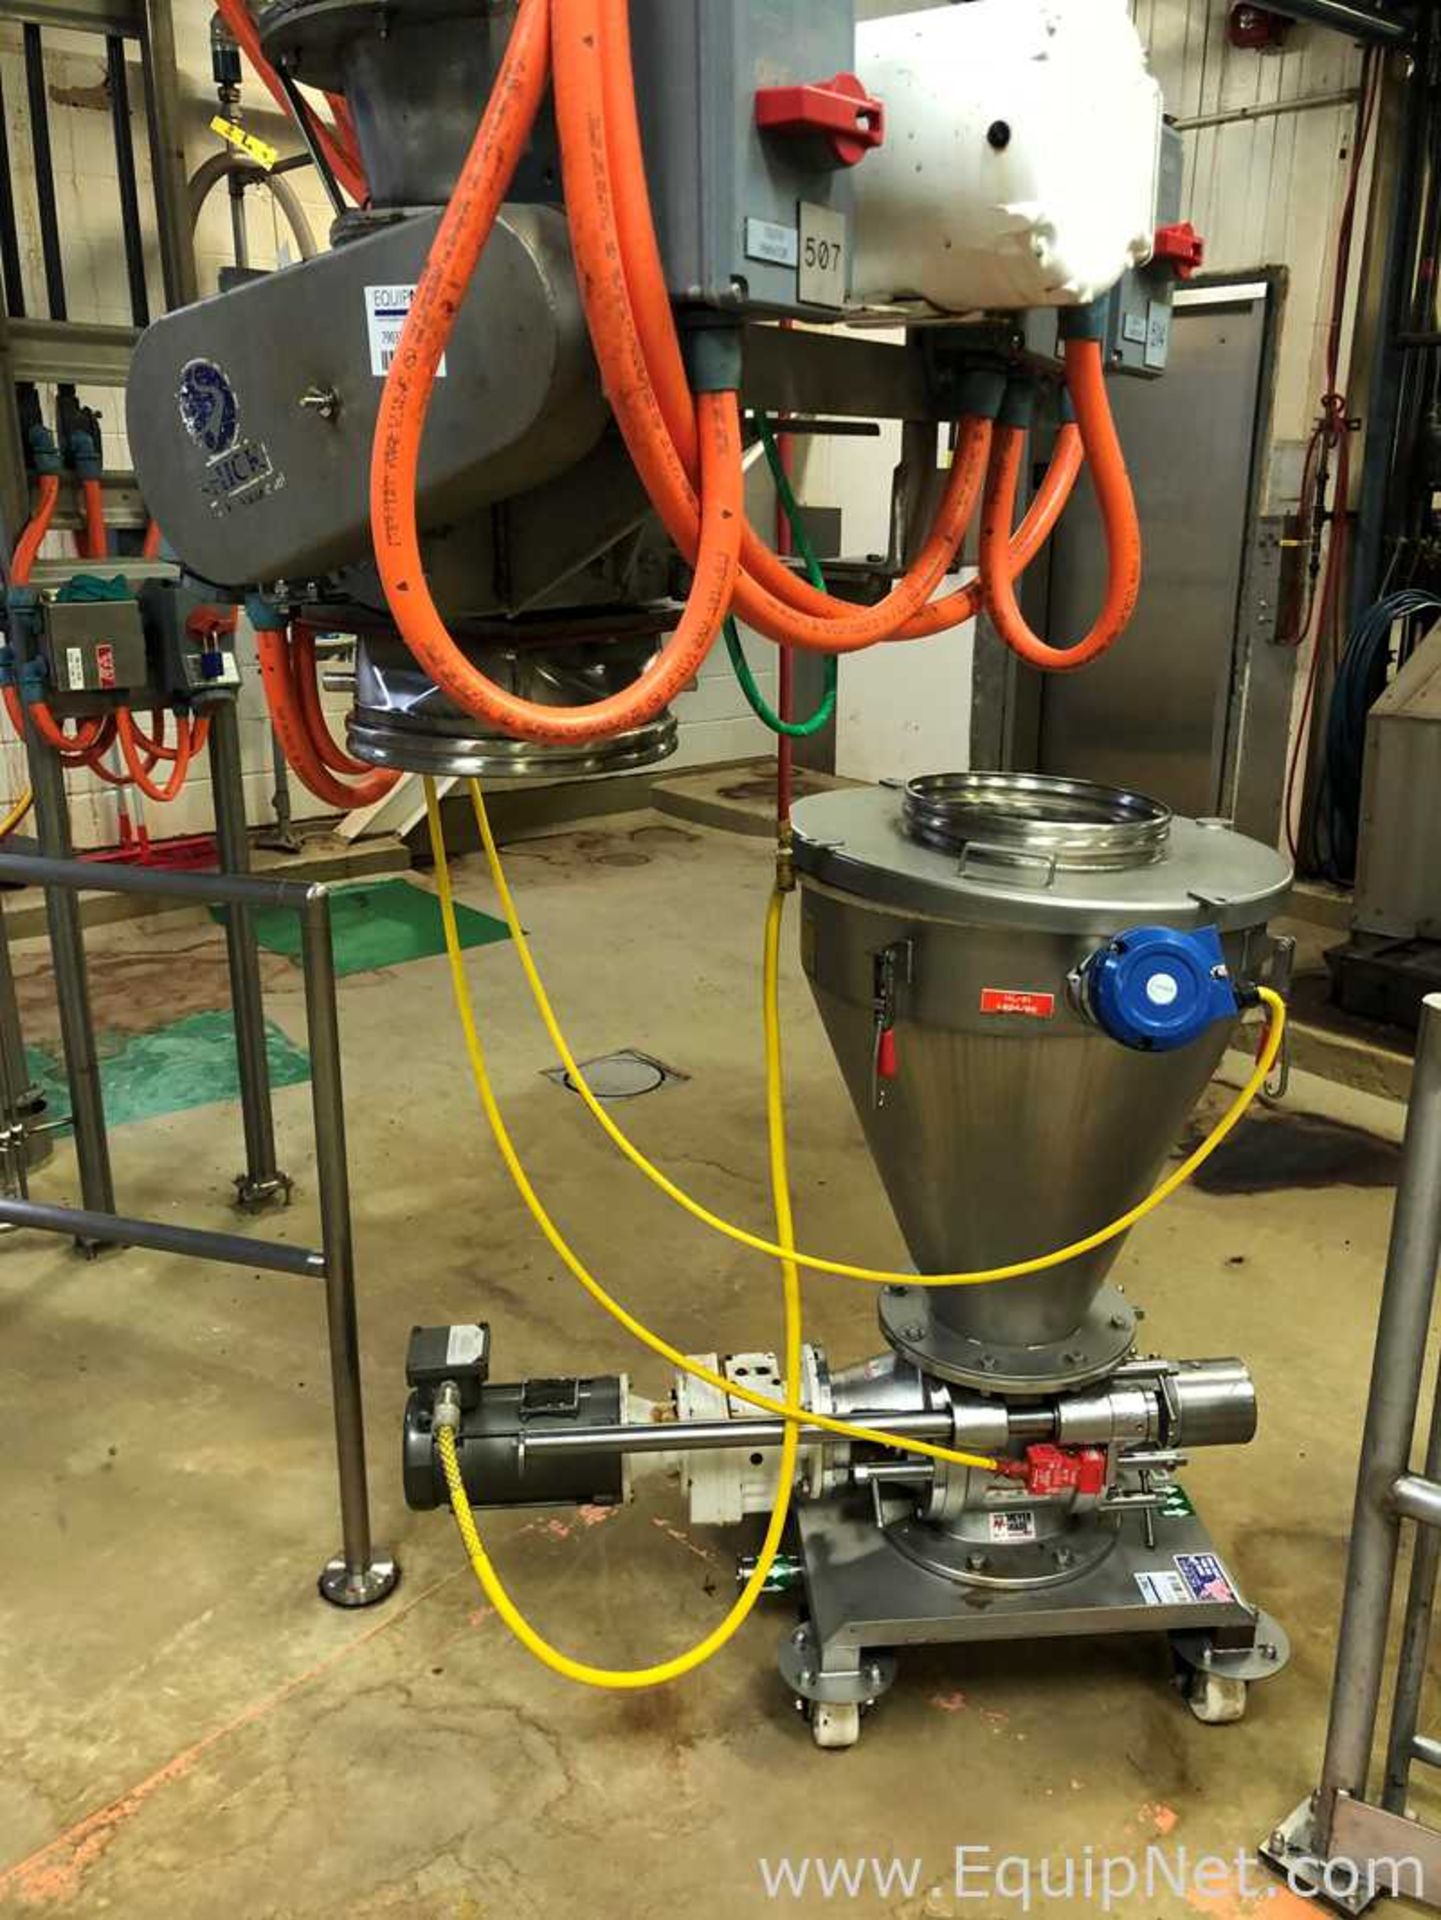 One Vacuum Conveyor System Vac-U-Max With Hopper And One Shick S-225-1 Rotary Valve